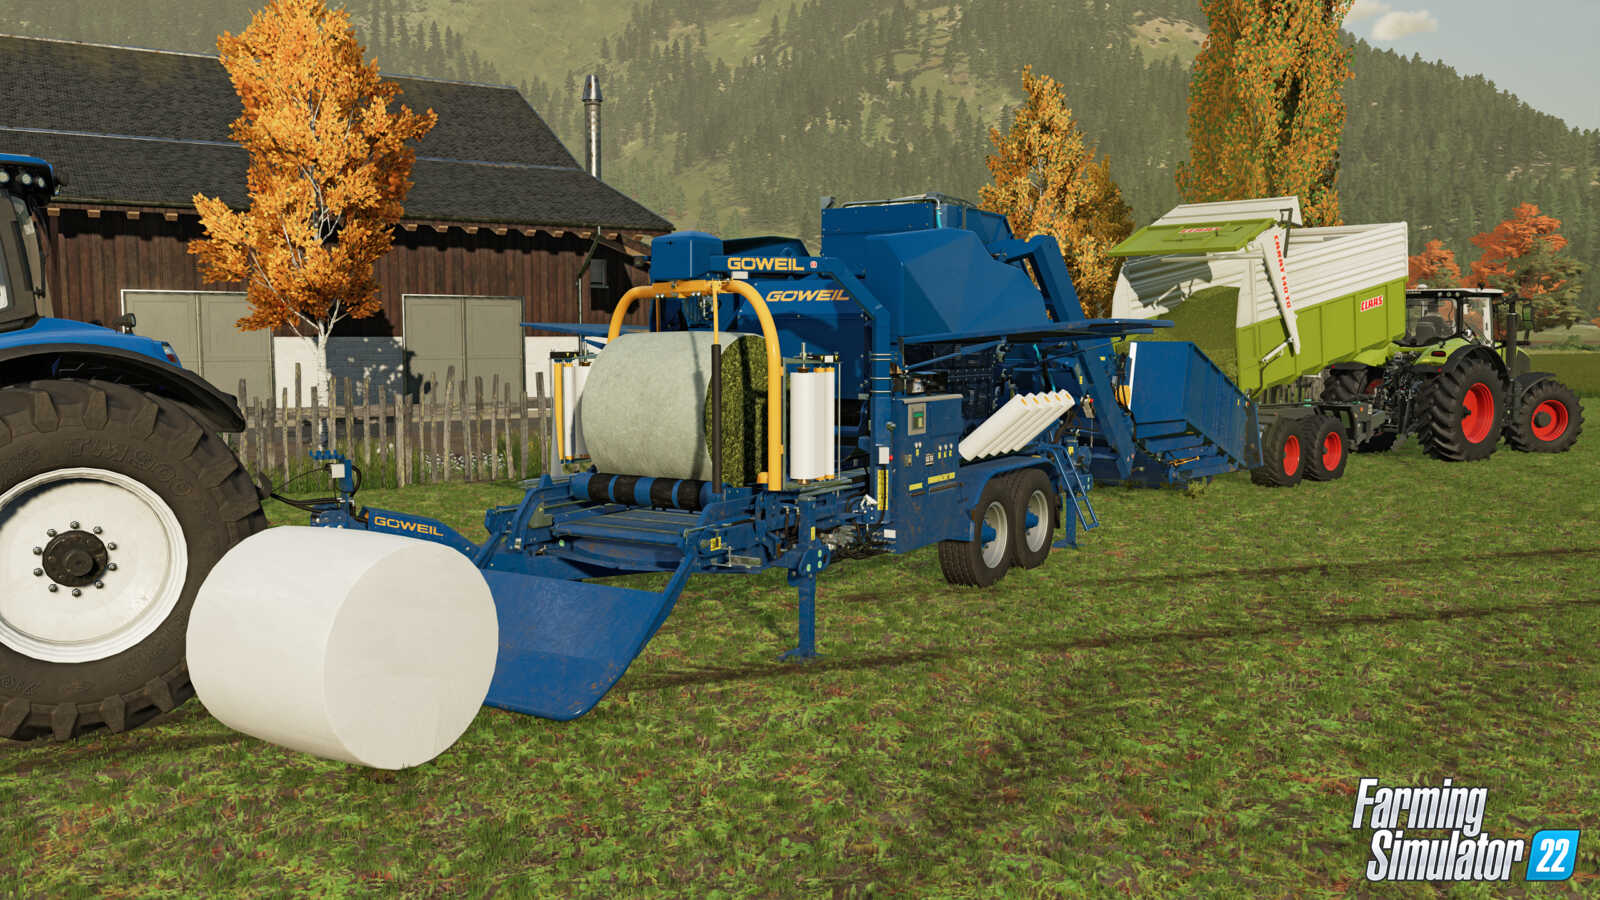 Göweil pack for Farming Simulator 22: an obvious way to press corn